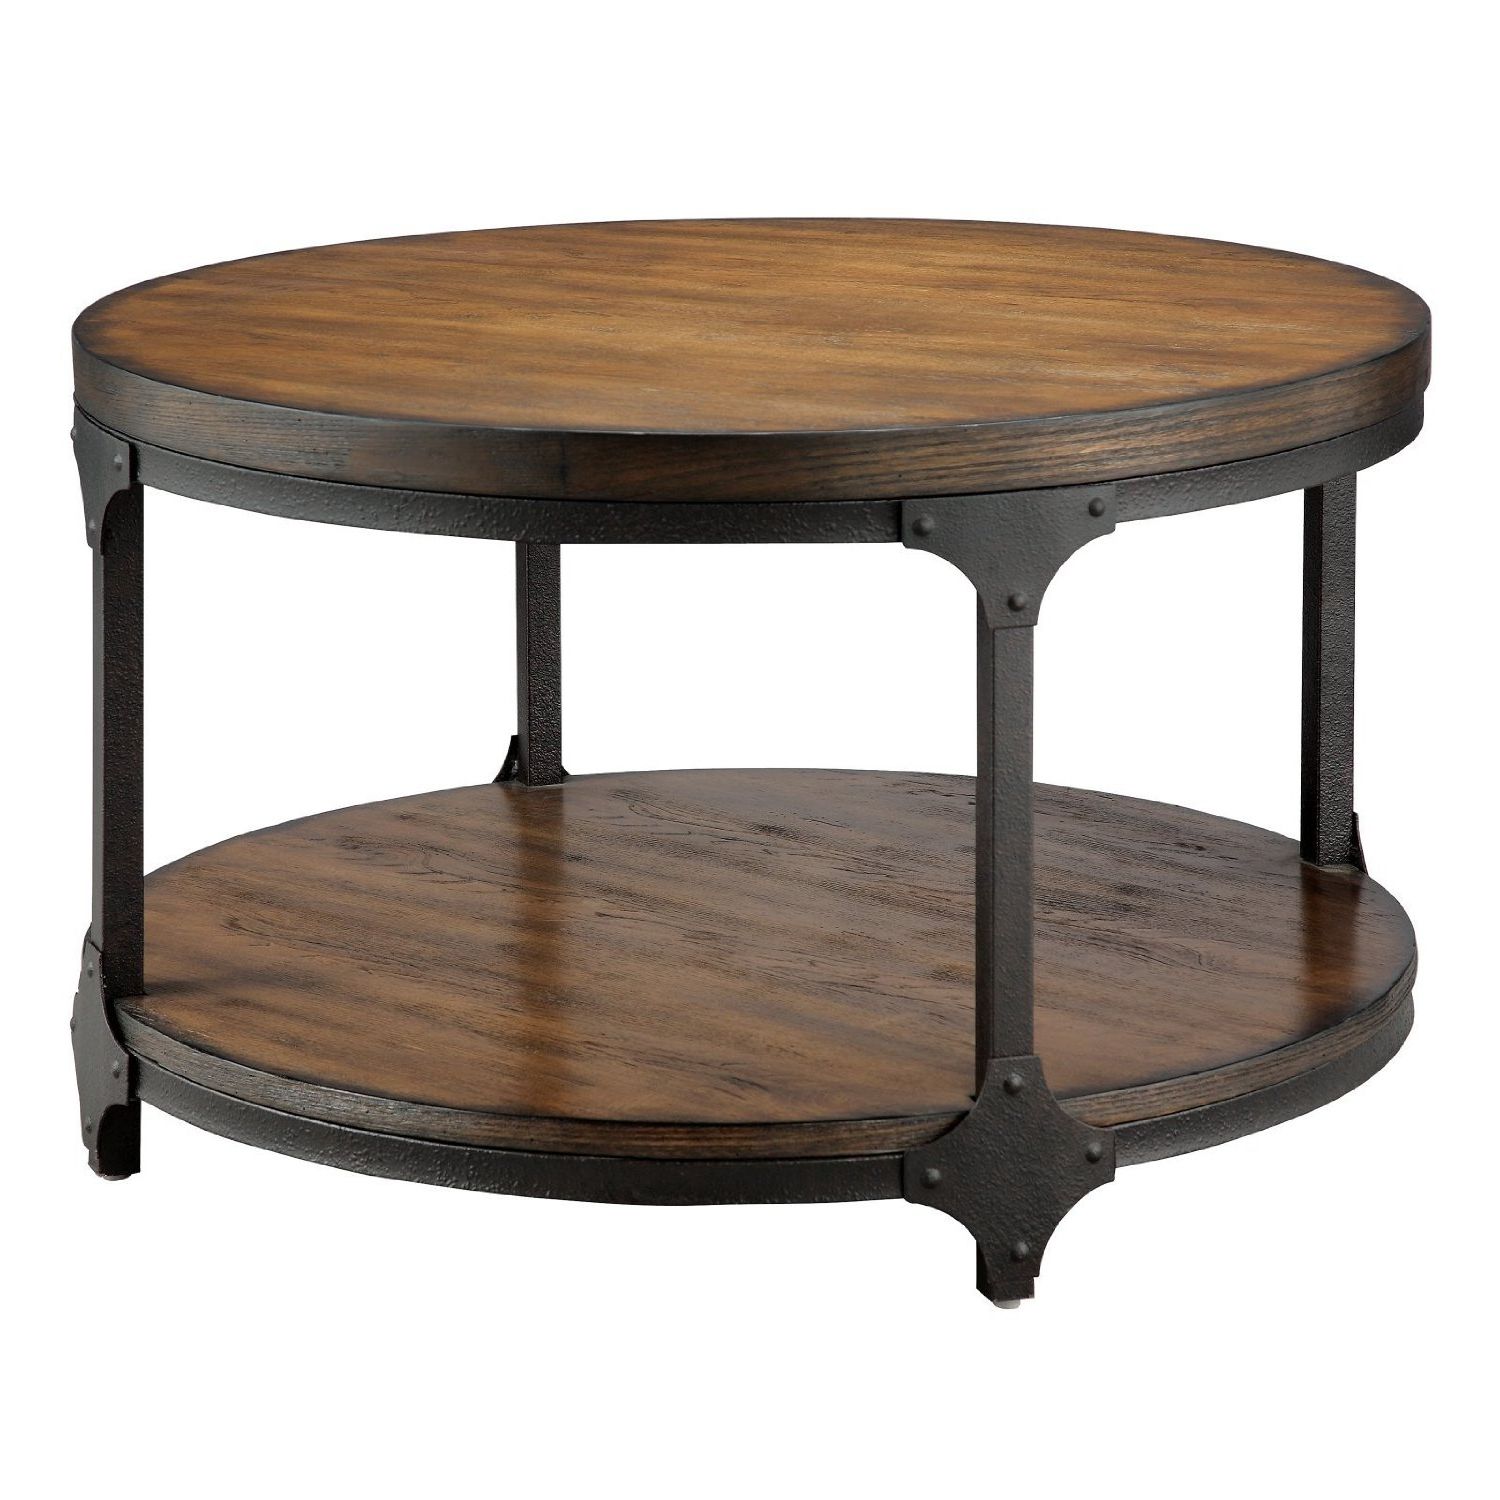 Mill Large Coffee Tables In Newest Coffee Tables Ideas: Round Wooden Coffee Table With Storage Coffee (View 5 of 20)